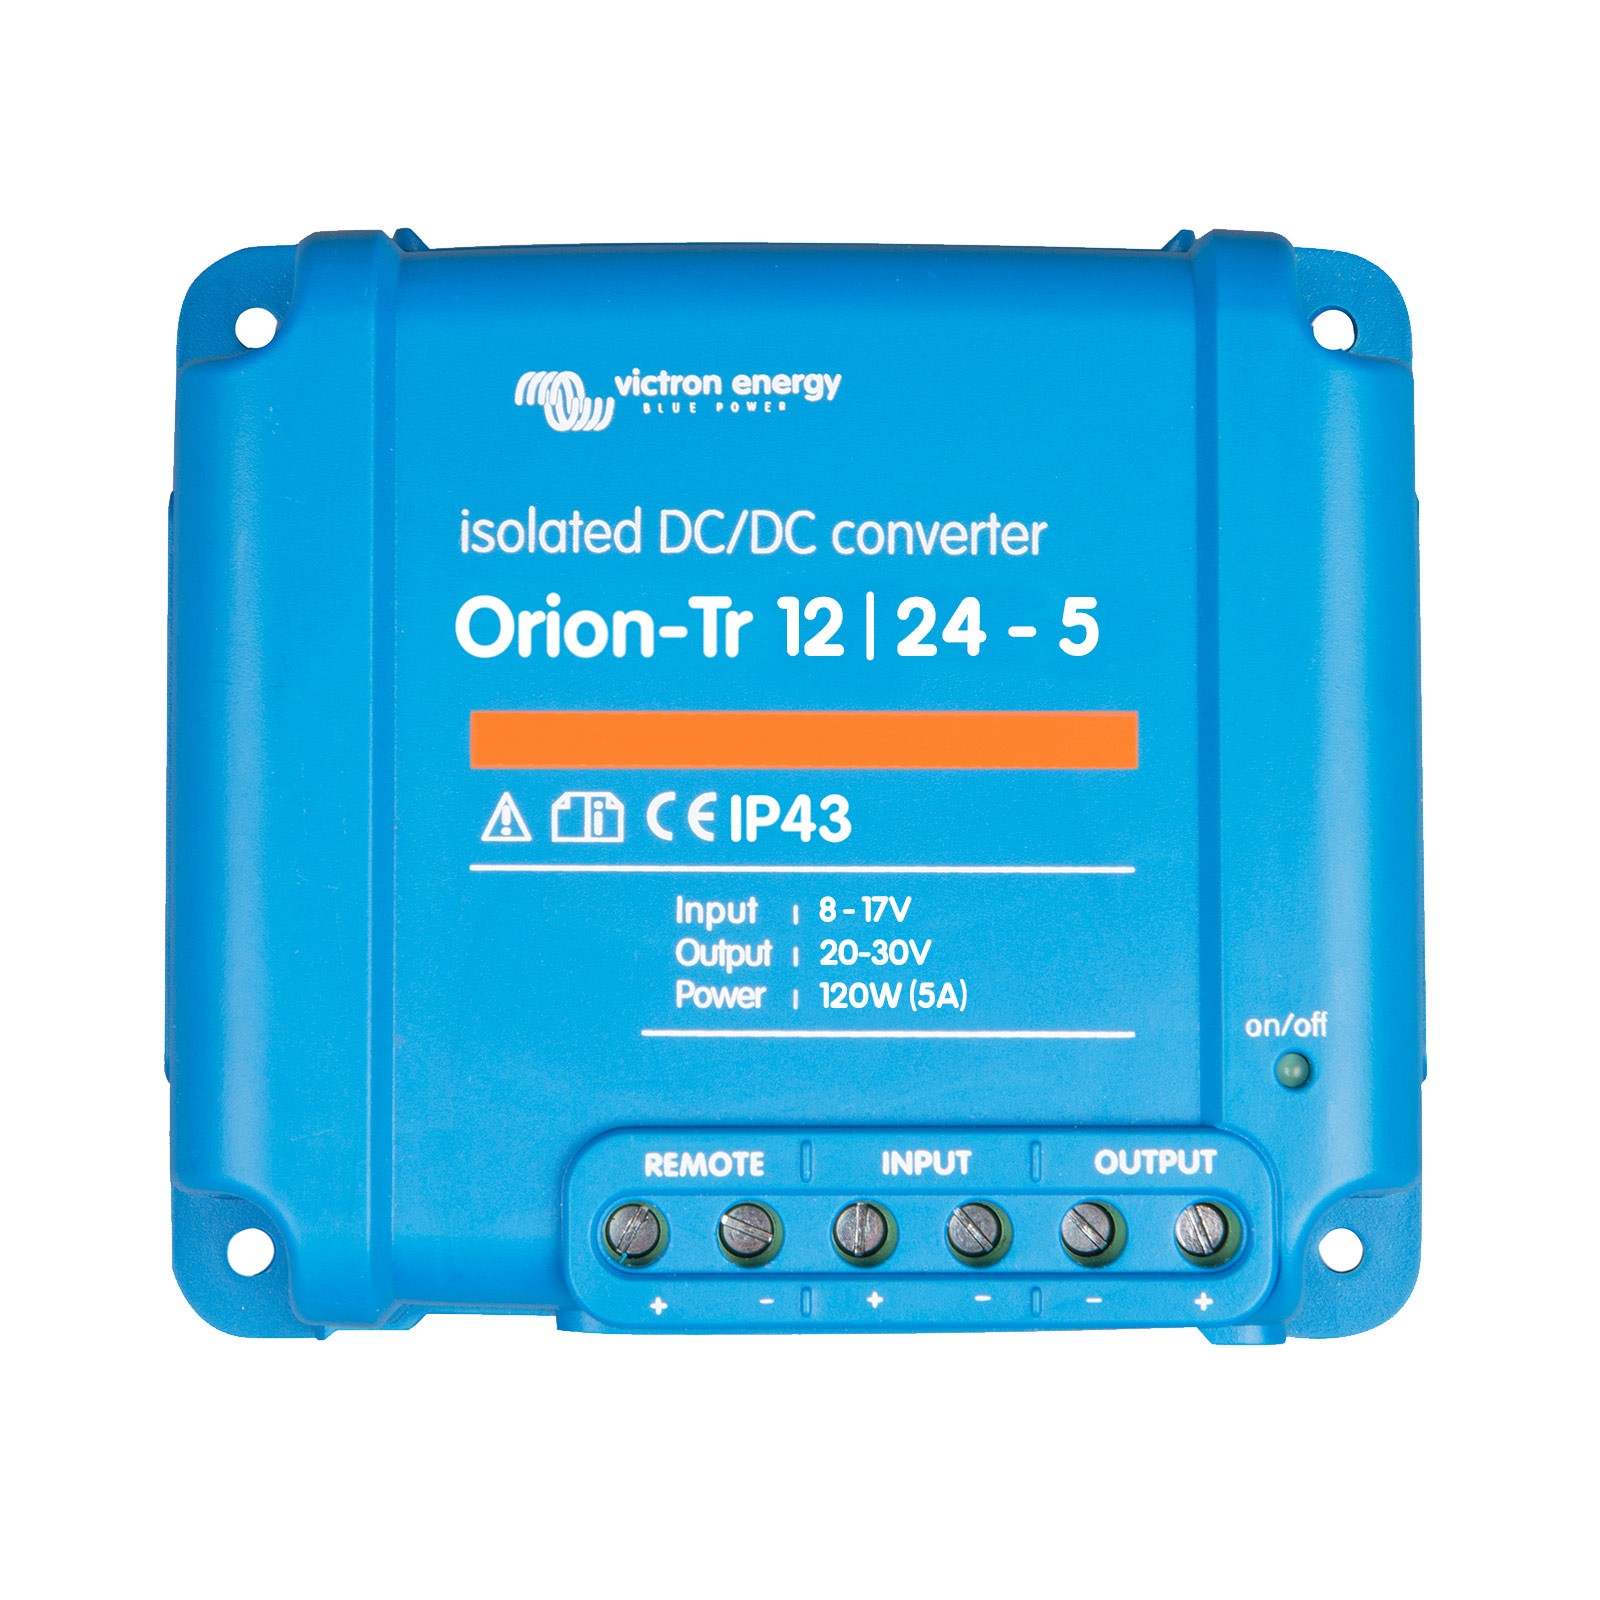 Isolierter Konverter Orion-Tr 12/24-5 A Victron Energy